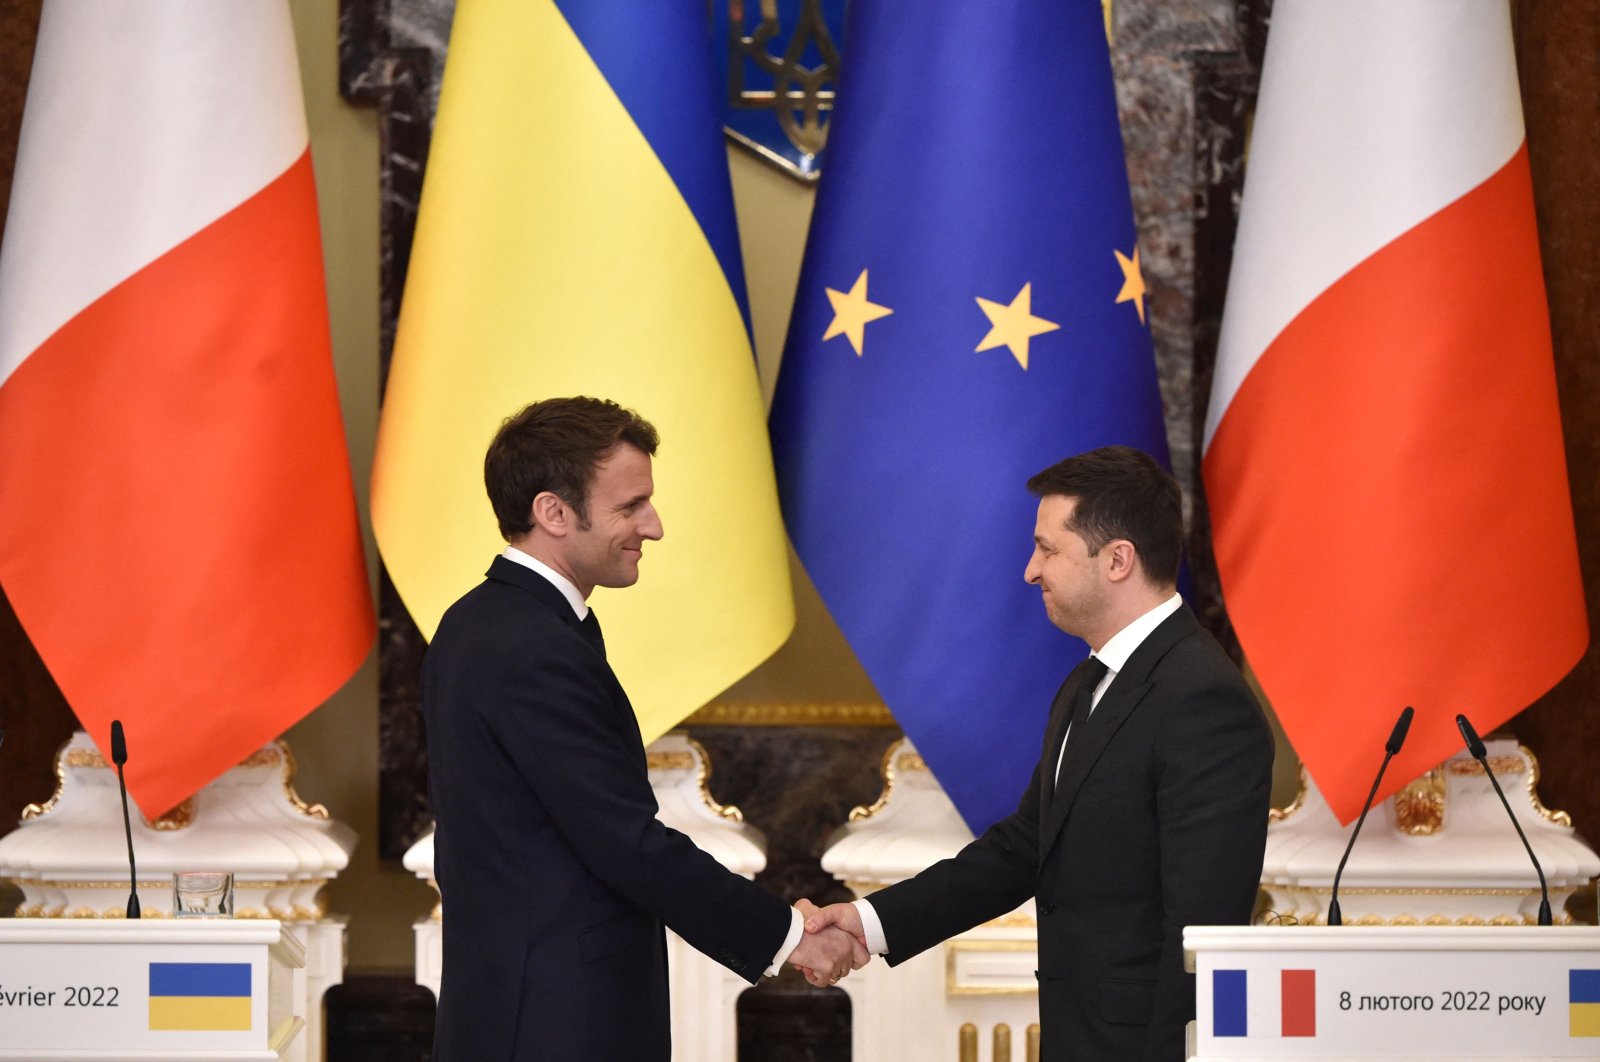 Ukrainian President Volodymyr Zelenskyy (R) and French President Emmanuel Macron shake hands after a press conference following their meeting in Kyiv, Ukraine, Feb. 8, 2022. (AFP Photo)